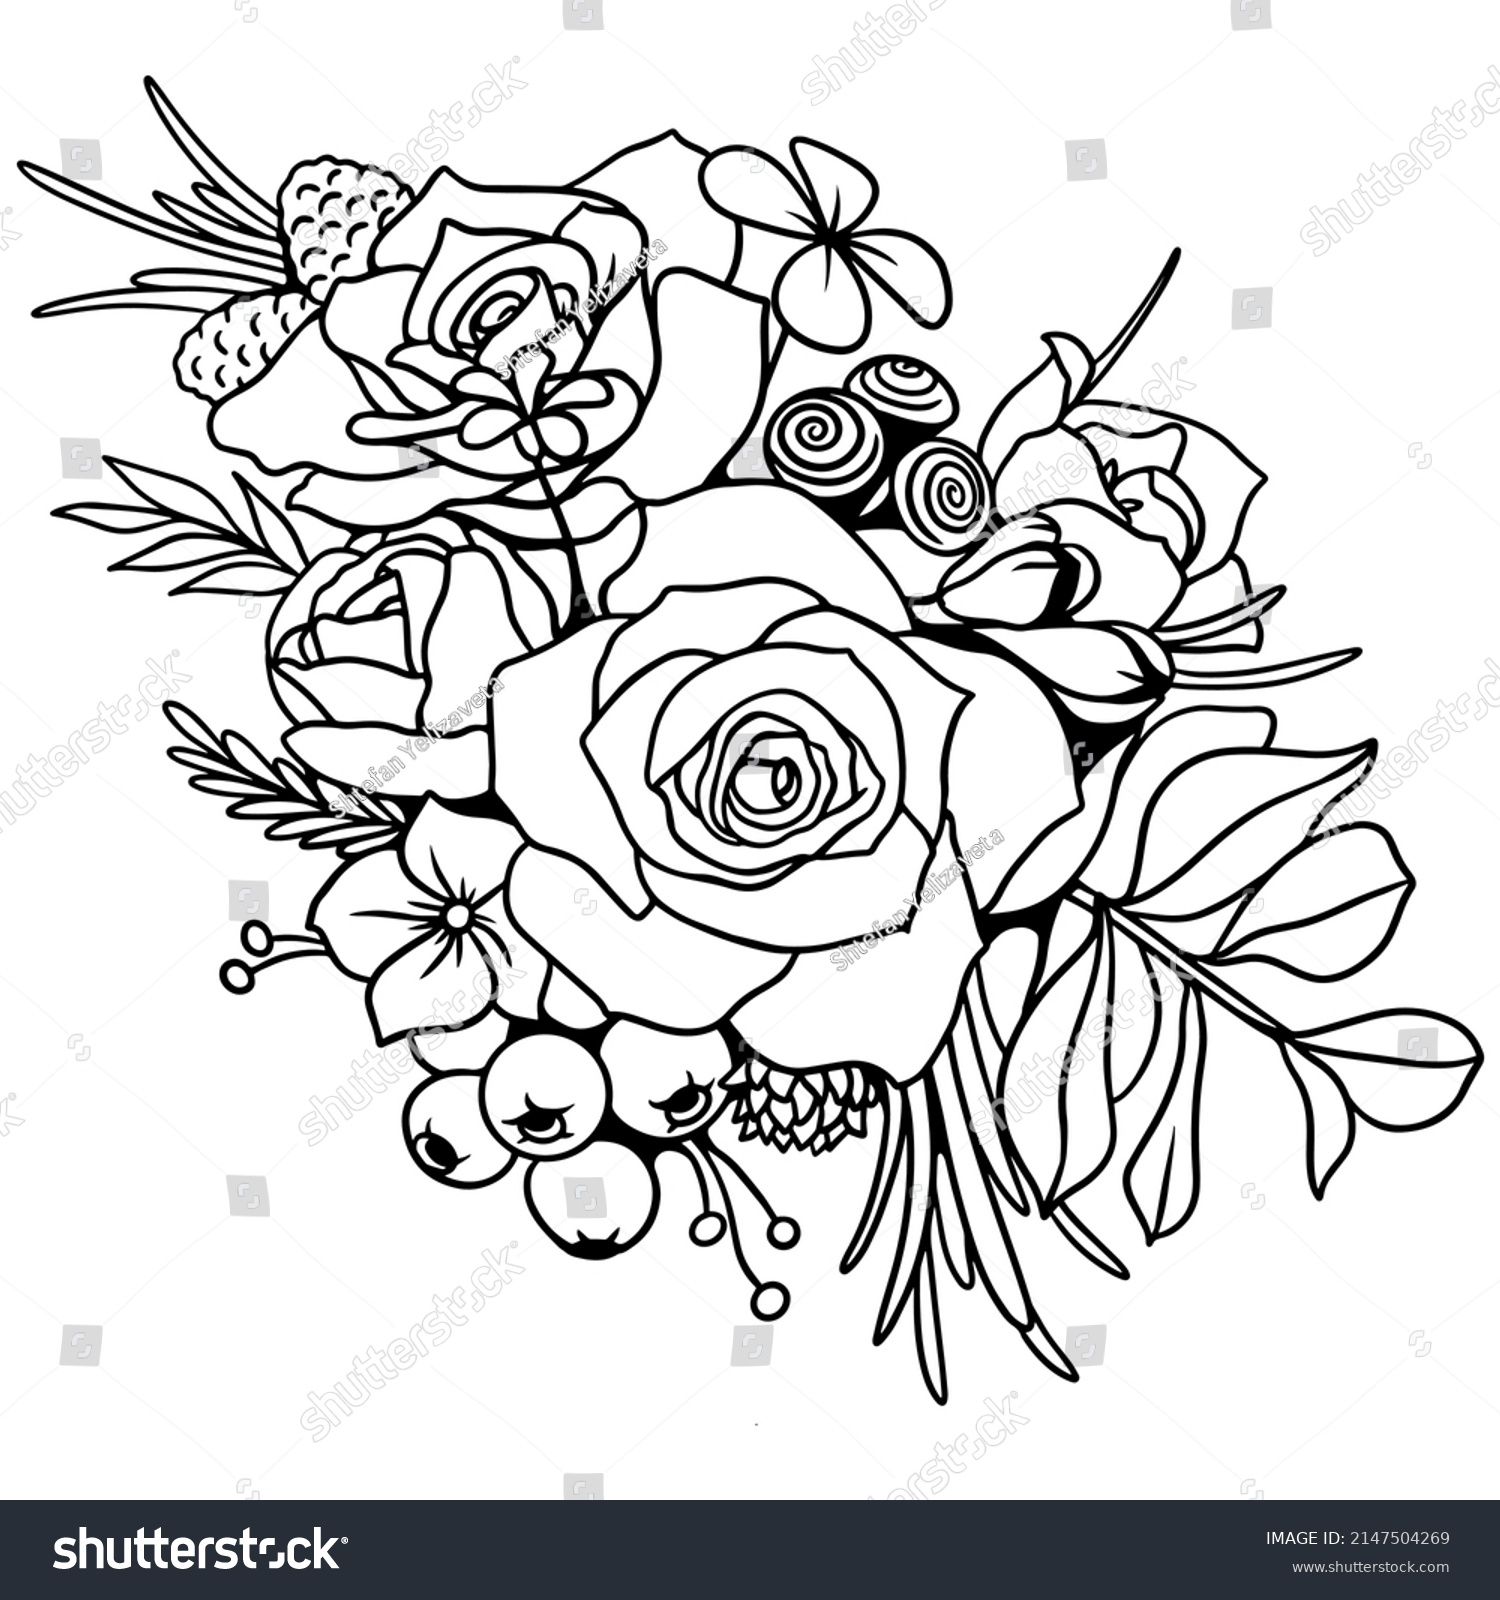 SVG of Drawing and sketch of rose flowers and wildflowers in a line drawing on a white background. A bunch of flowers wreath svg